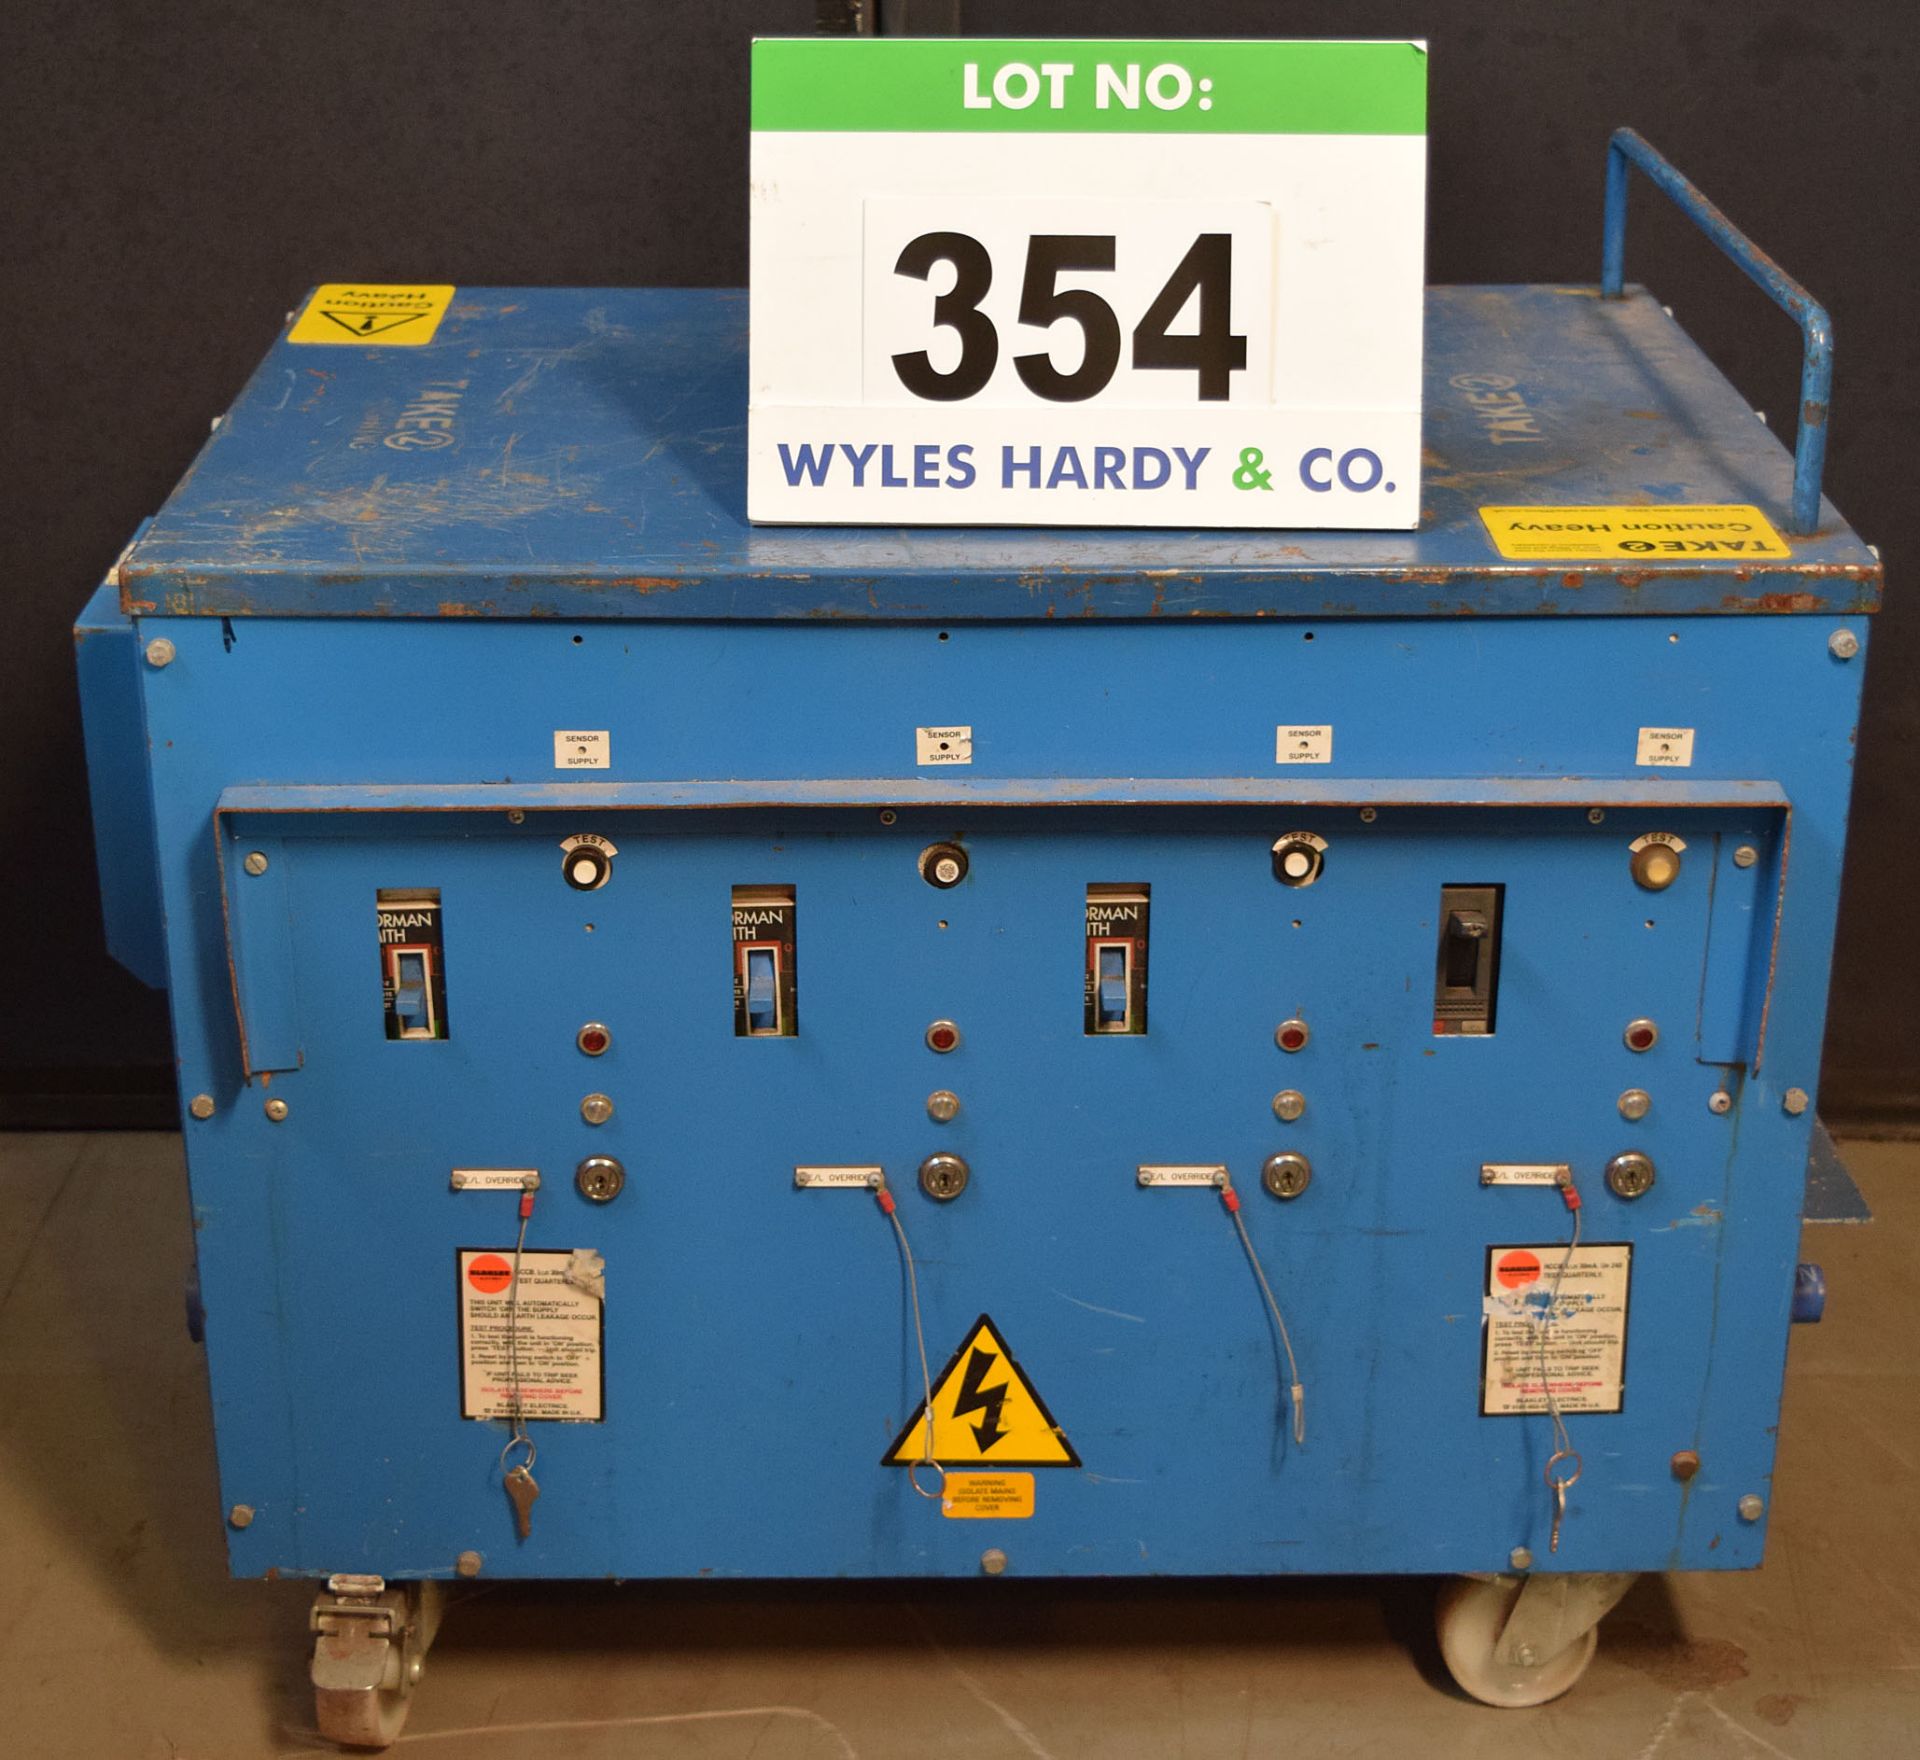 A BLAKLEY ELECTRICS Steel Enclosed Castor mounted Power Distribution Unit - 400A 1PH PowerLock In to